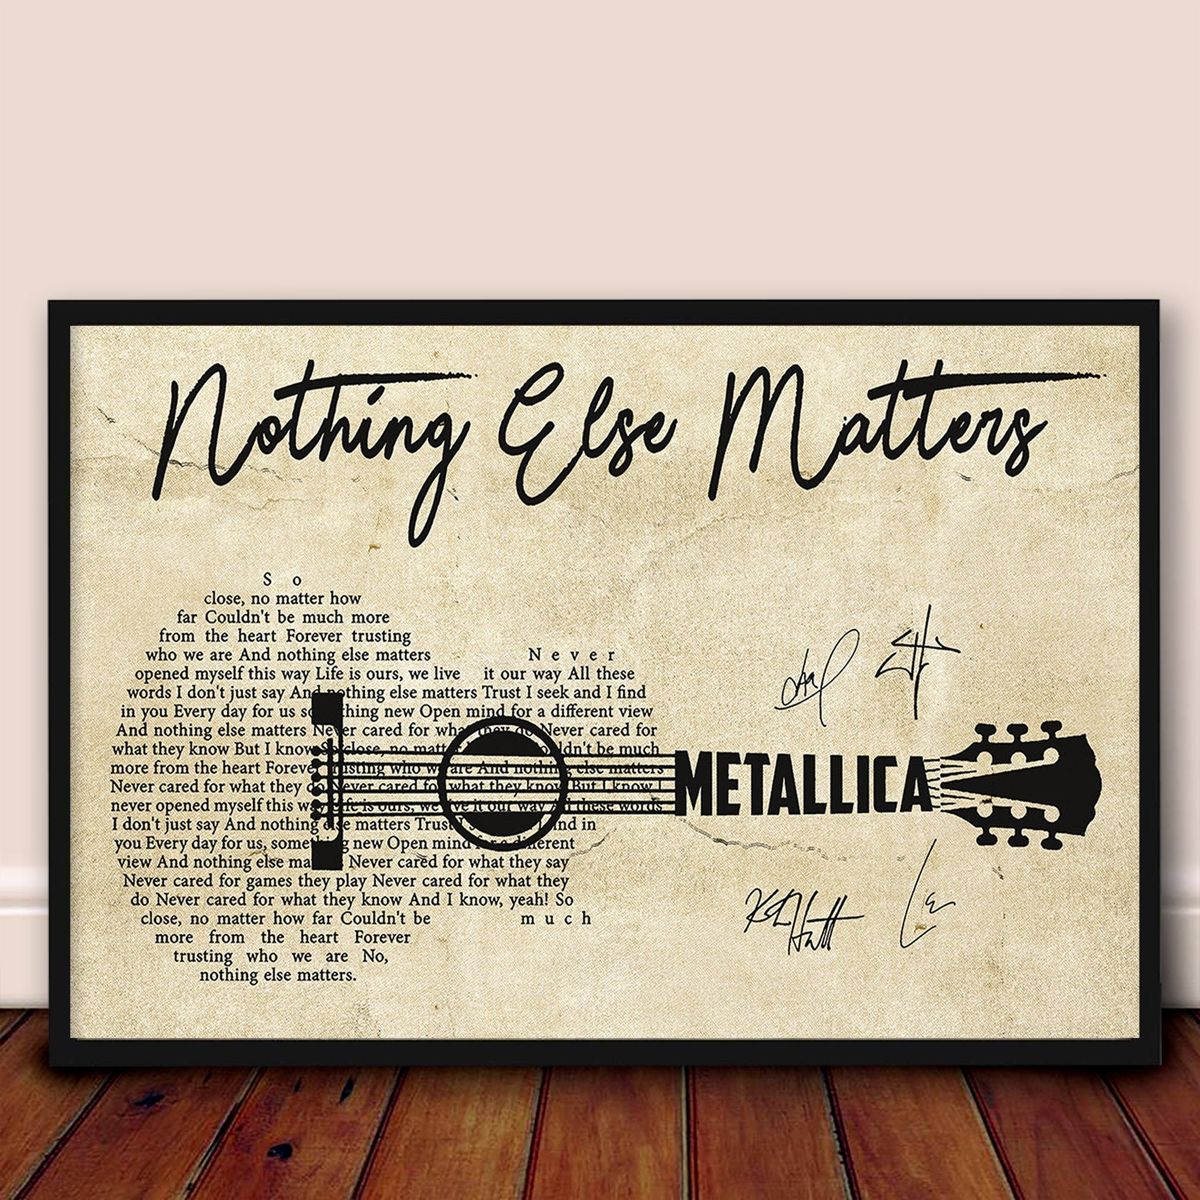 Else matters перевод на русский. Металлика nothing. Metallica nothing else matters текст. Текст металлика nothing else matters. Металлика nothing текст.